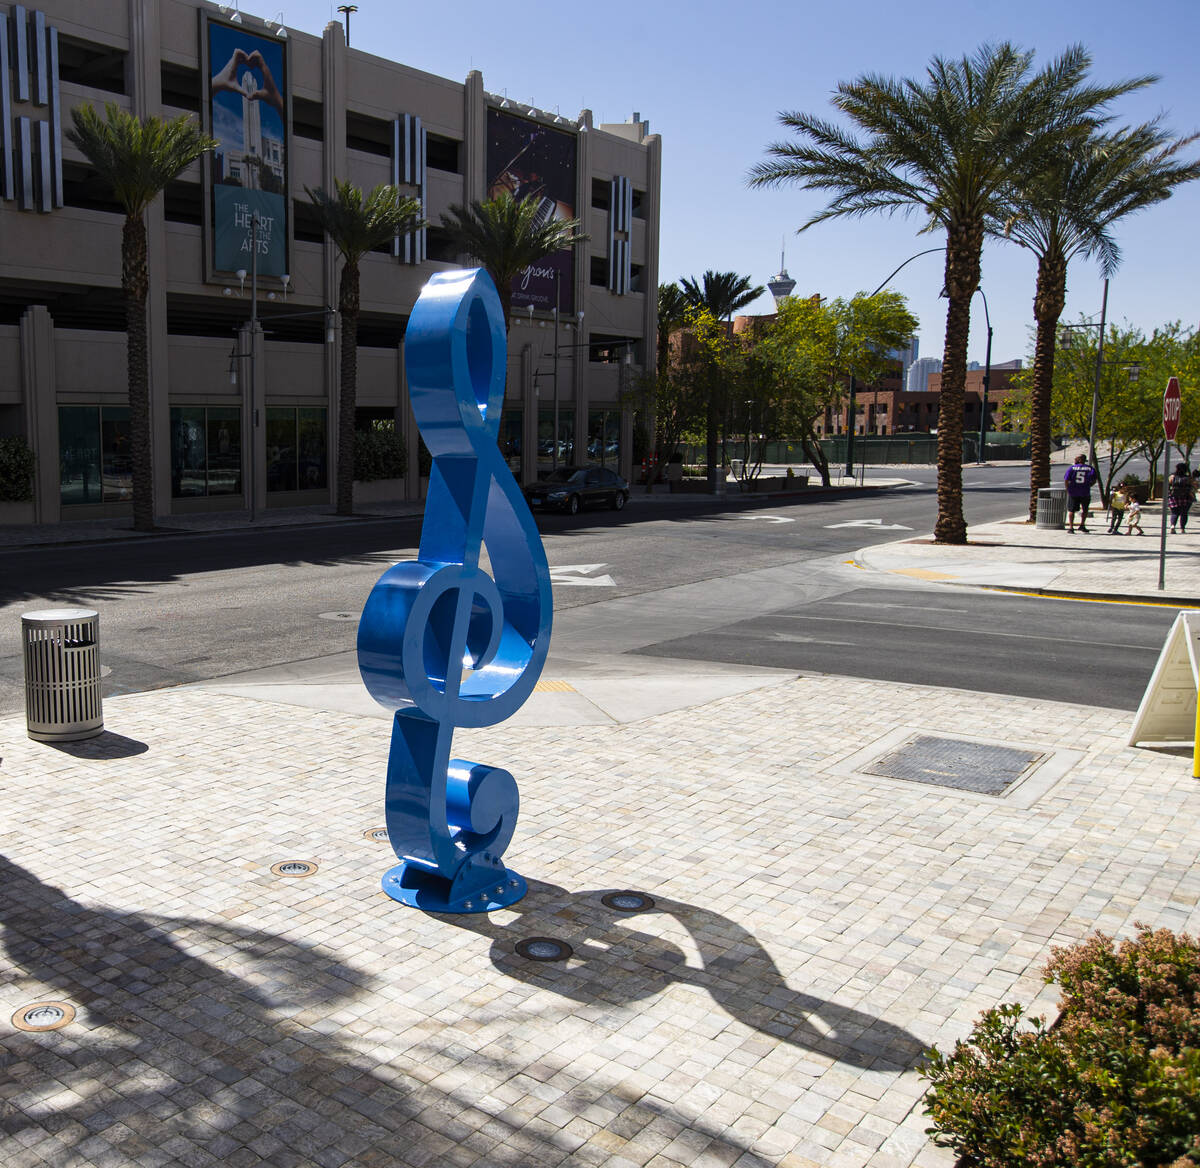 A steel treble clef is pictured after the dedication of the "Larger Than Life" public ...